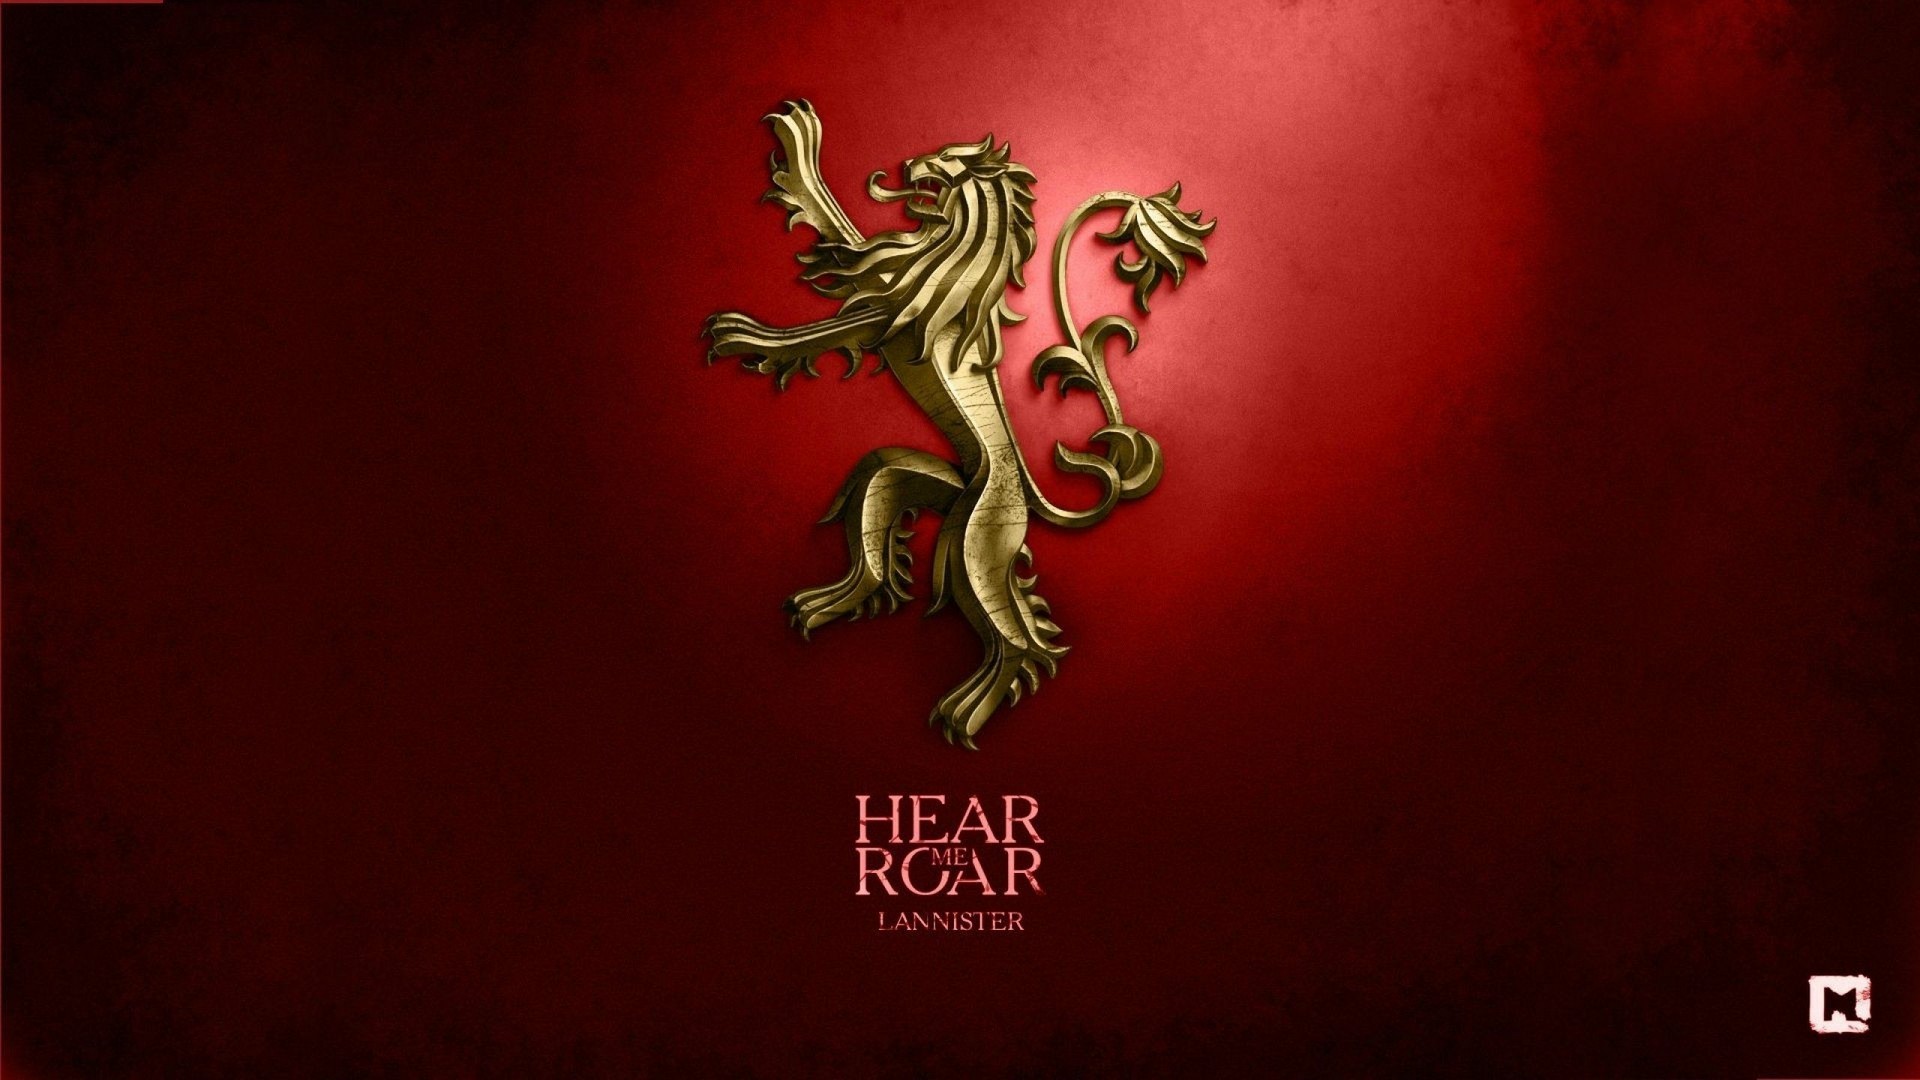 House Lannister Game of Thrones Wallpaper HD with high-resolution 1920x1080 pixel. You can use this poster wallpaper for your Desktop Computers, Mac Screensavers, Windows Backgrounds, iPhone Wallpapers, Tablet or Android Lock screen and another Mobile device